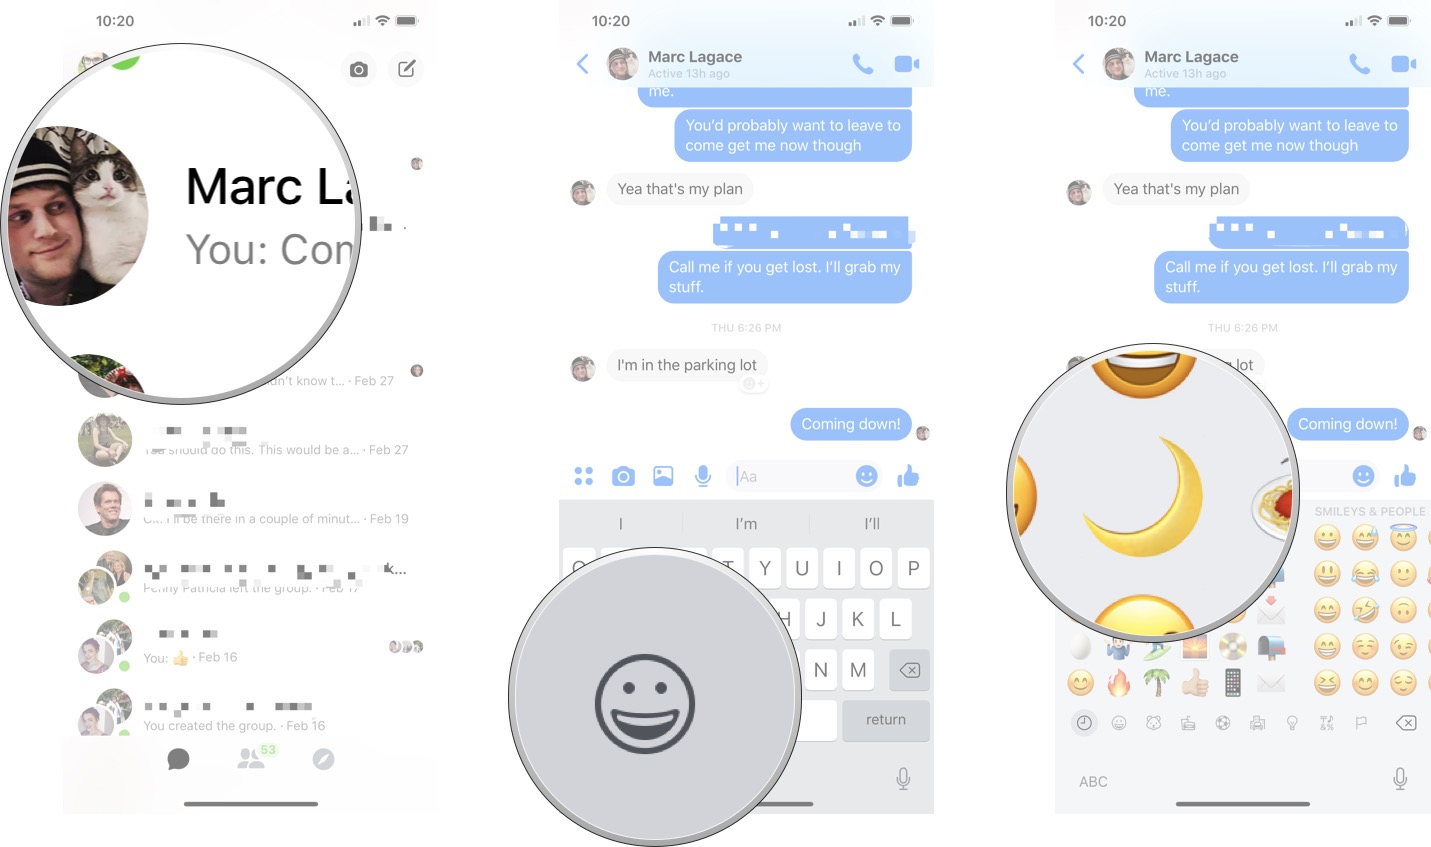 Launch Facebook Messenger, open a chat with a friend, send that friend the cresent moon emoji.